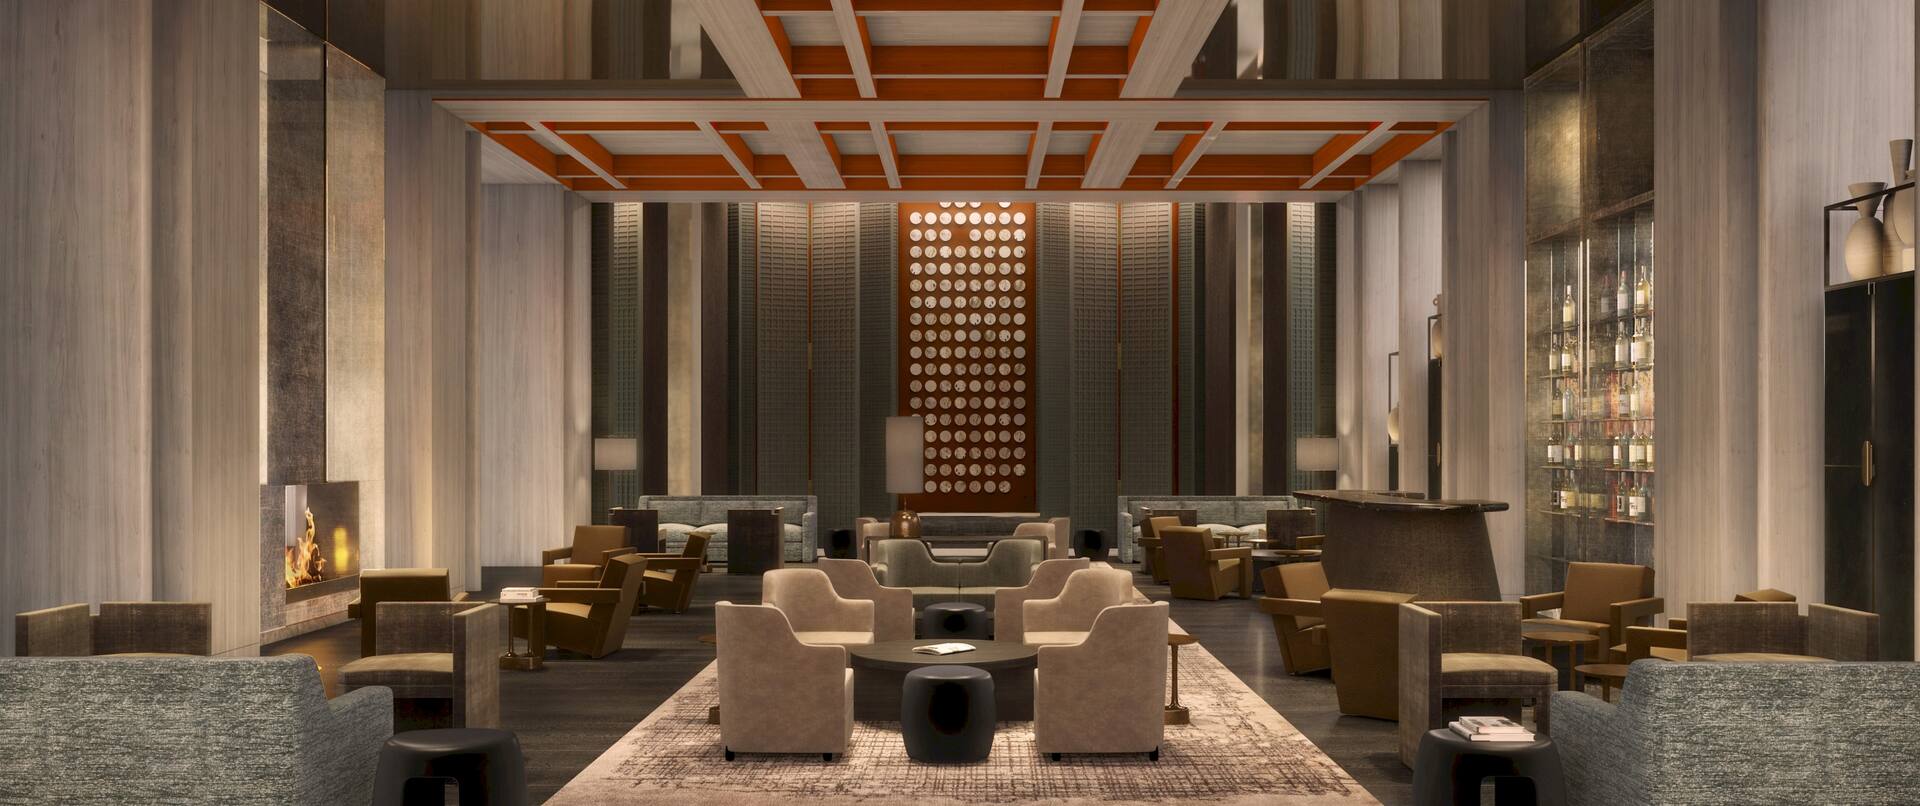 Lobby bar and seating area